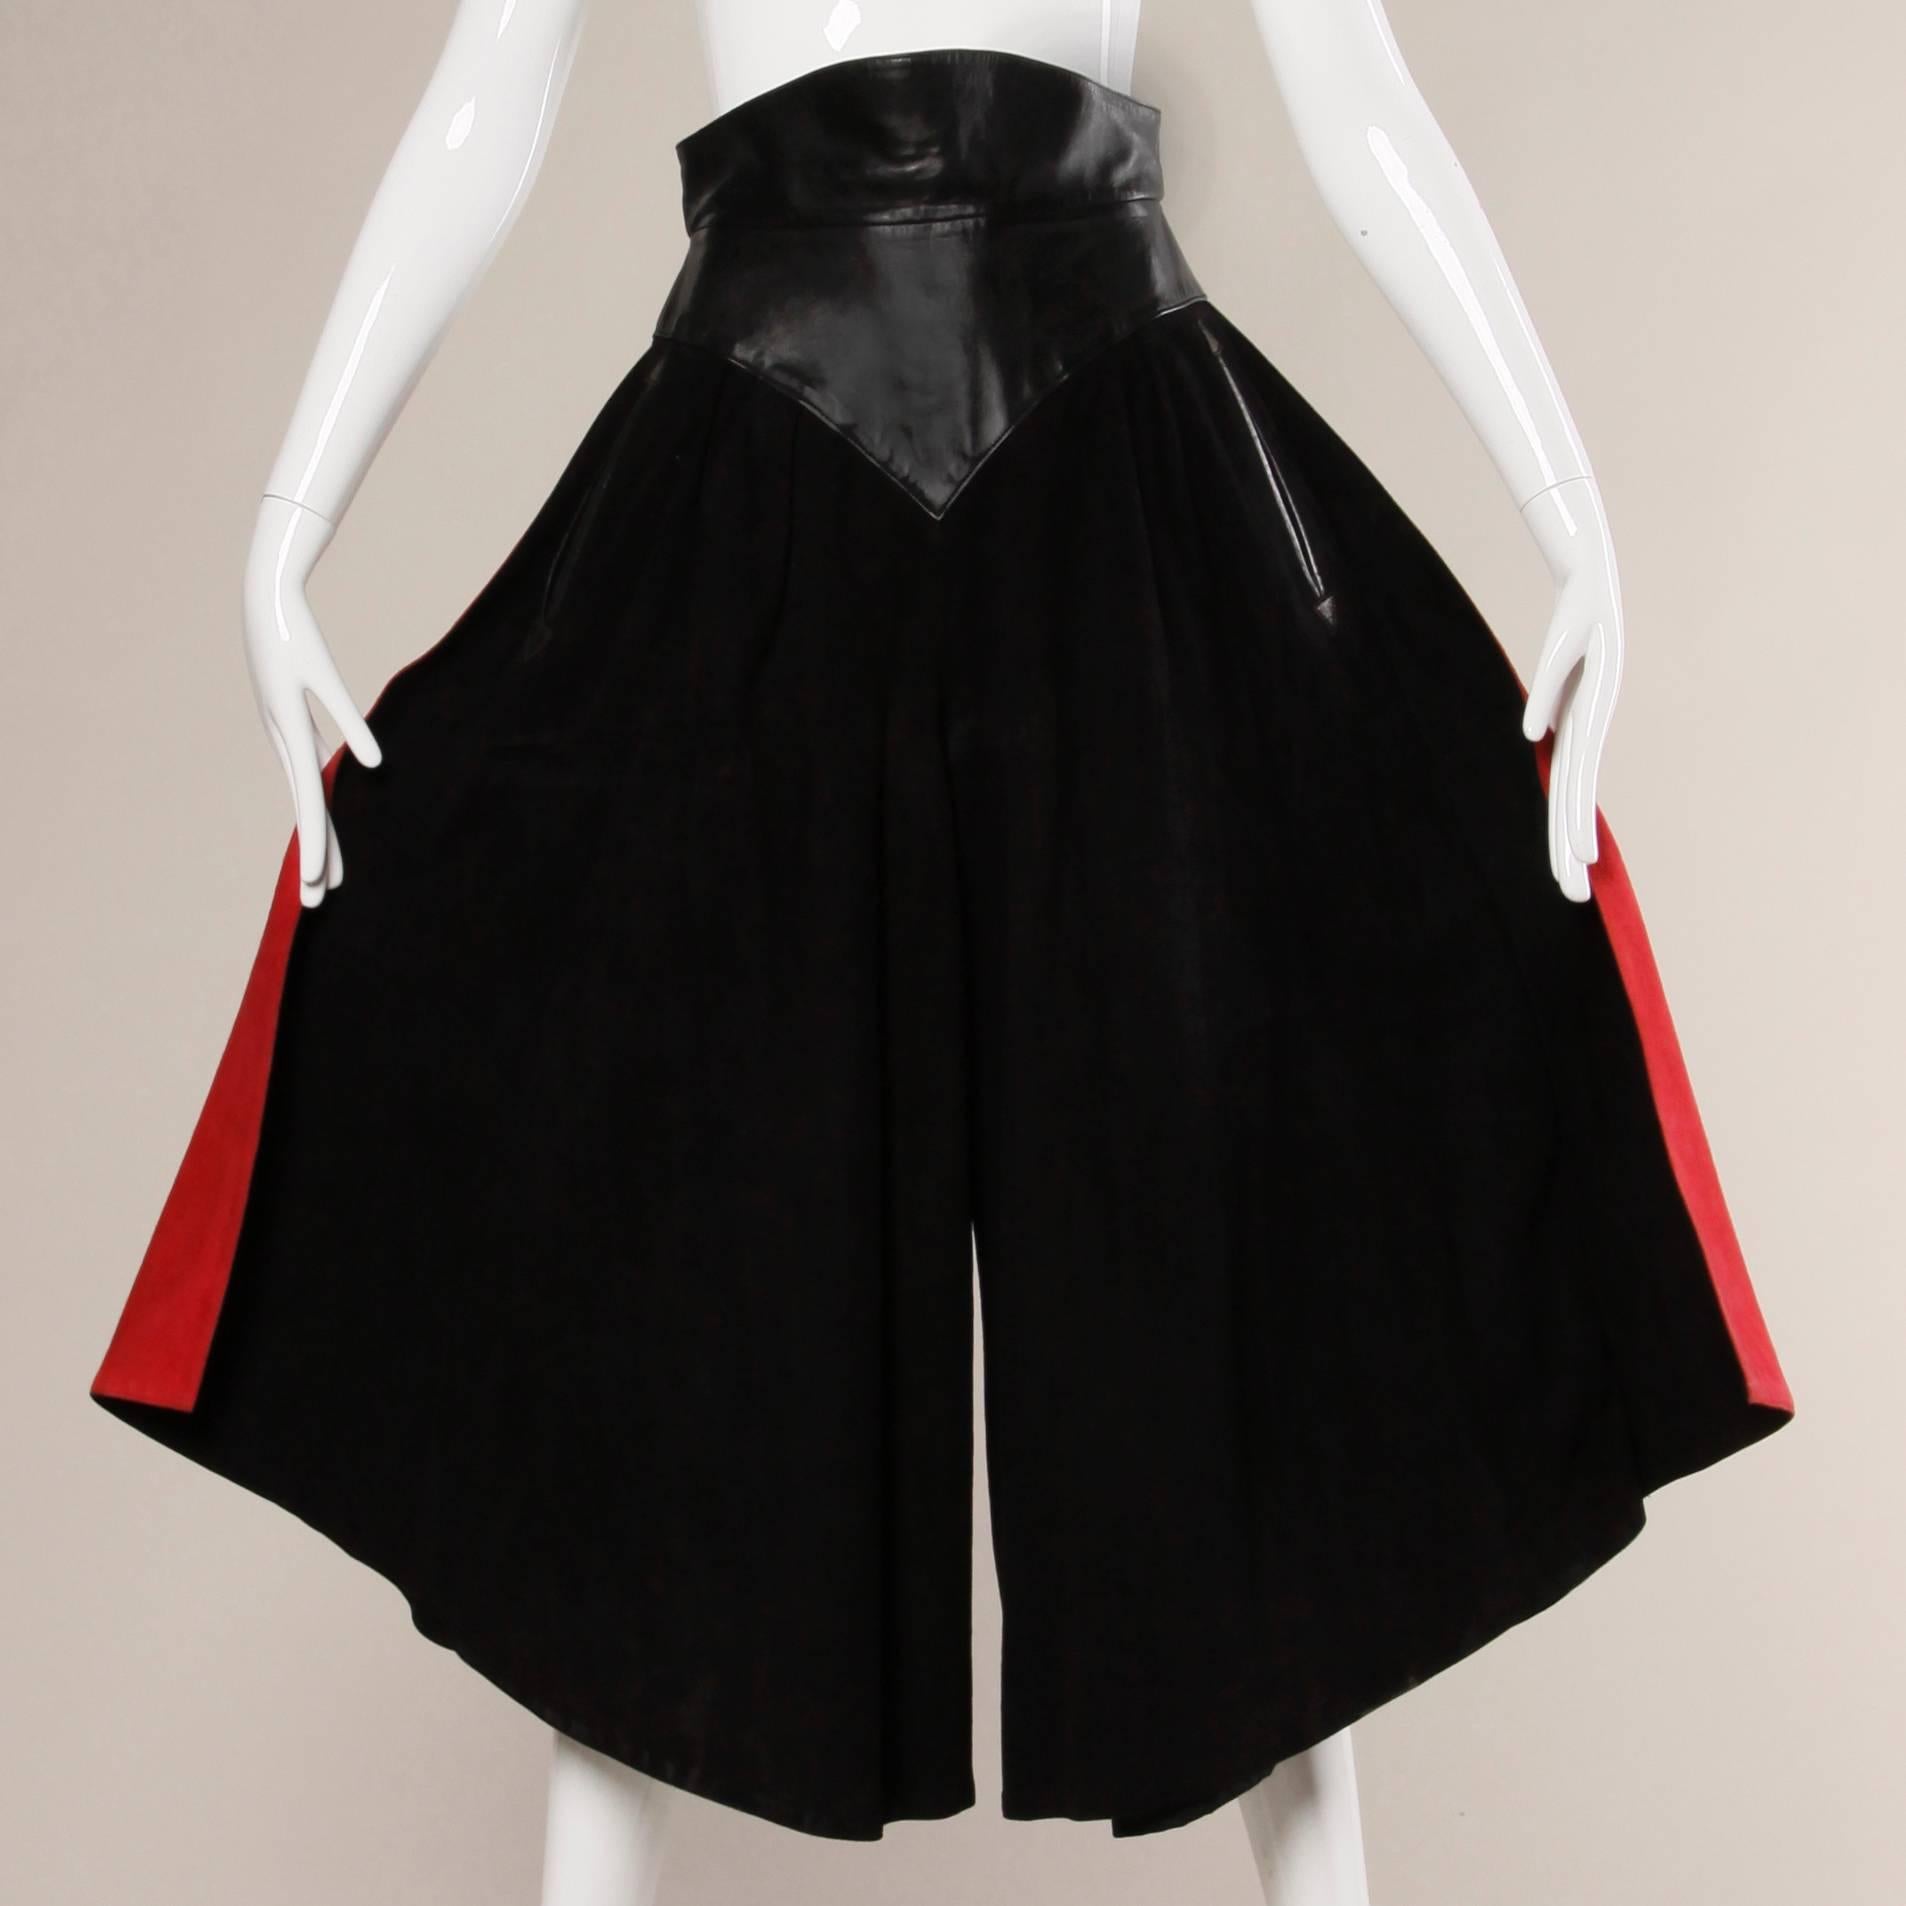 Incredible vintage Claude Montana Pour Ideal Cuir black suede culottes with buttery black leather waistband and red suede panels along the side of each leg. Unique design and amazing craftsmanship!

Details:

Lined
Back Zip Closure
Marked